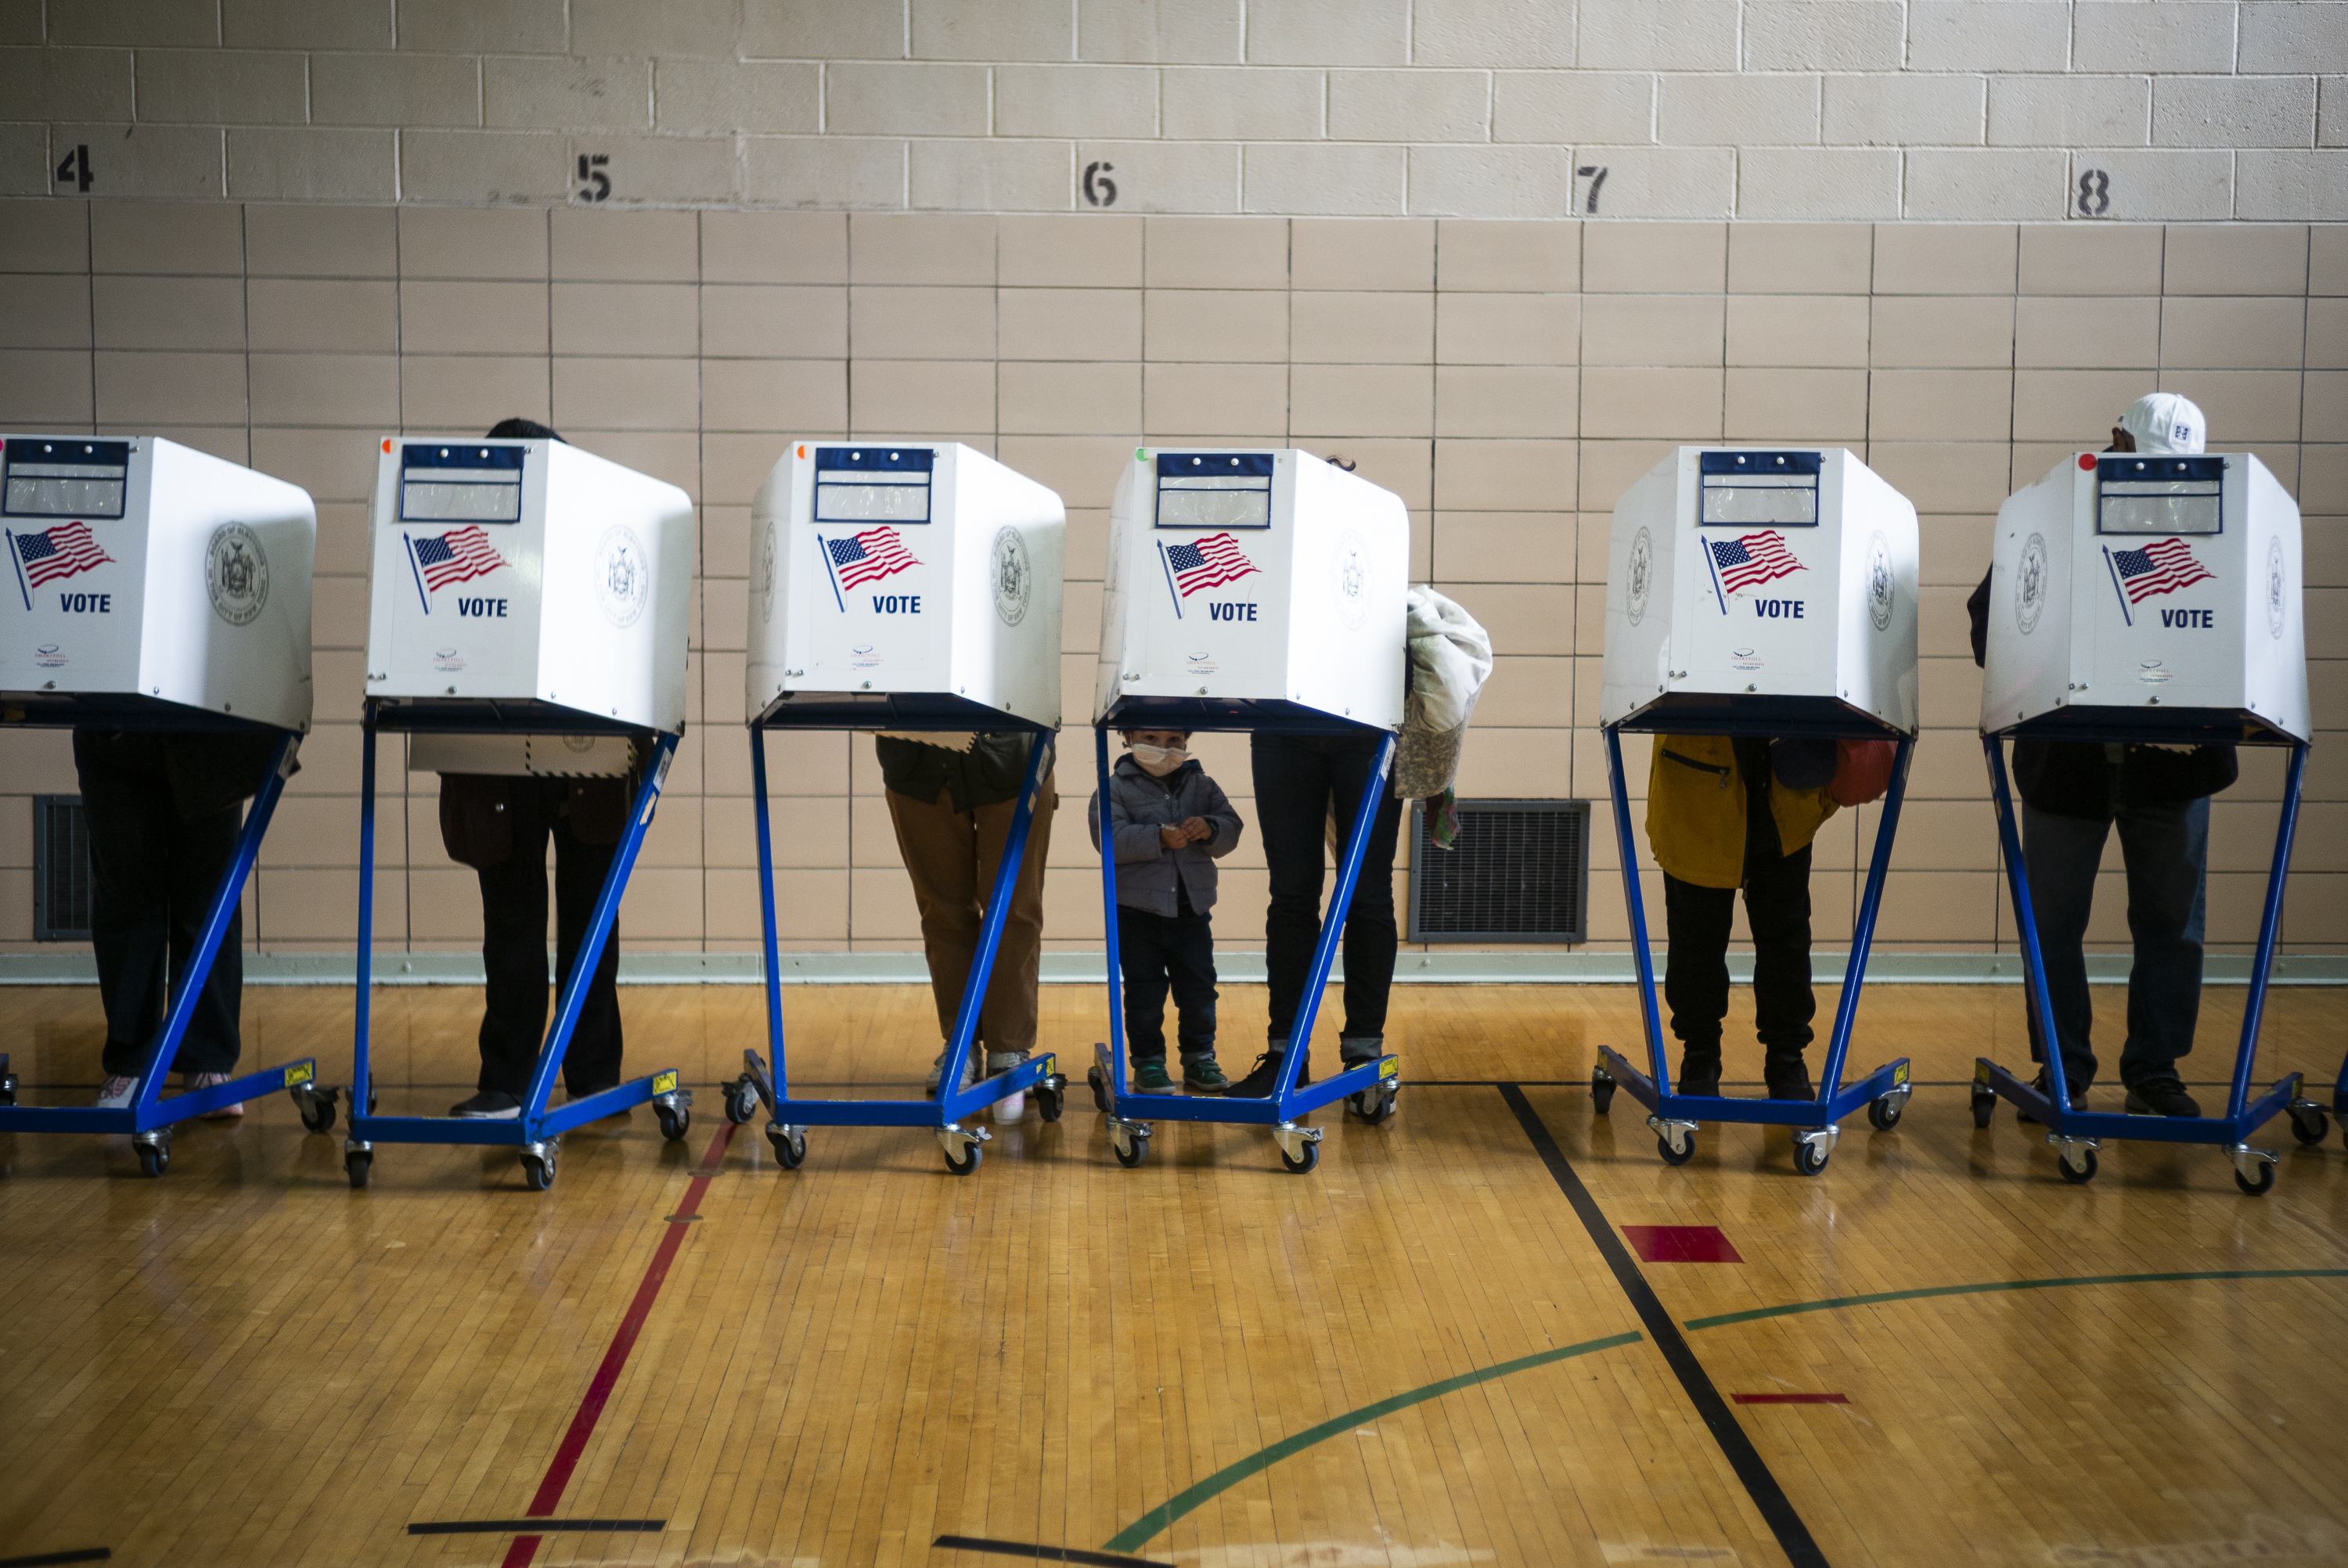 A row of voters inside a gymnasium.